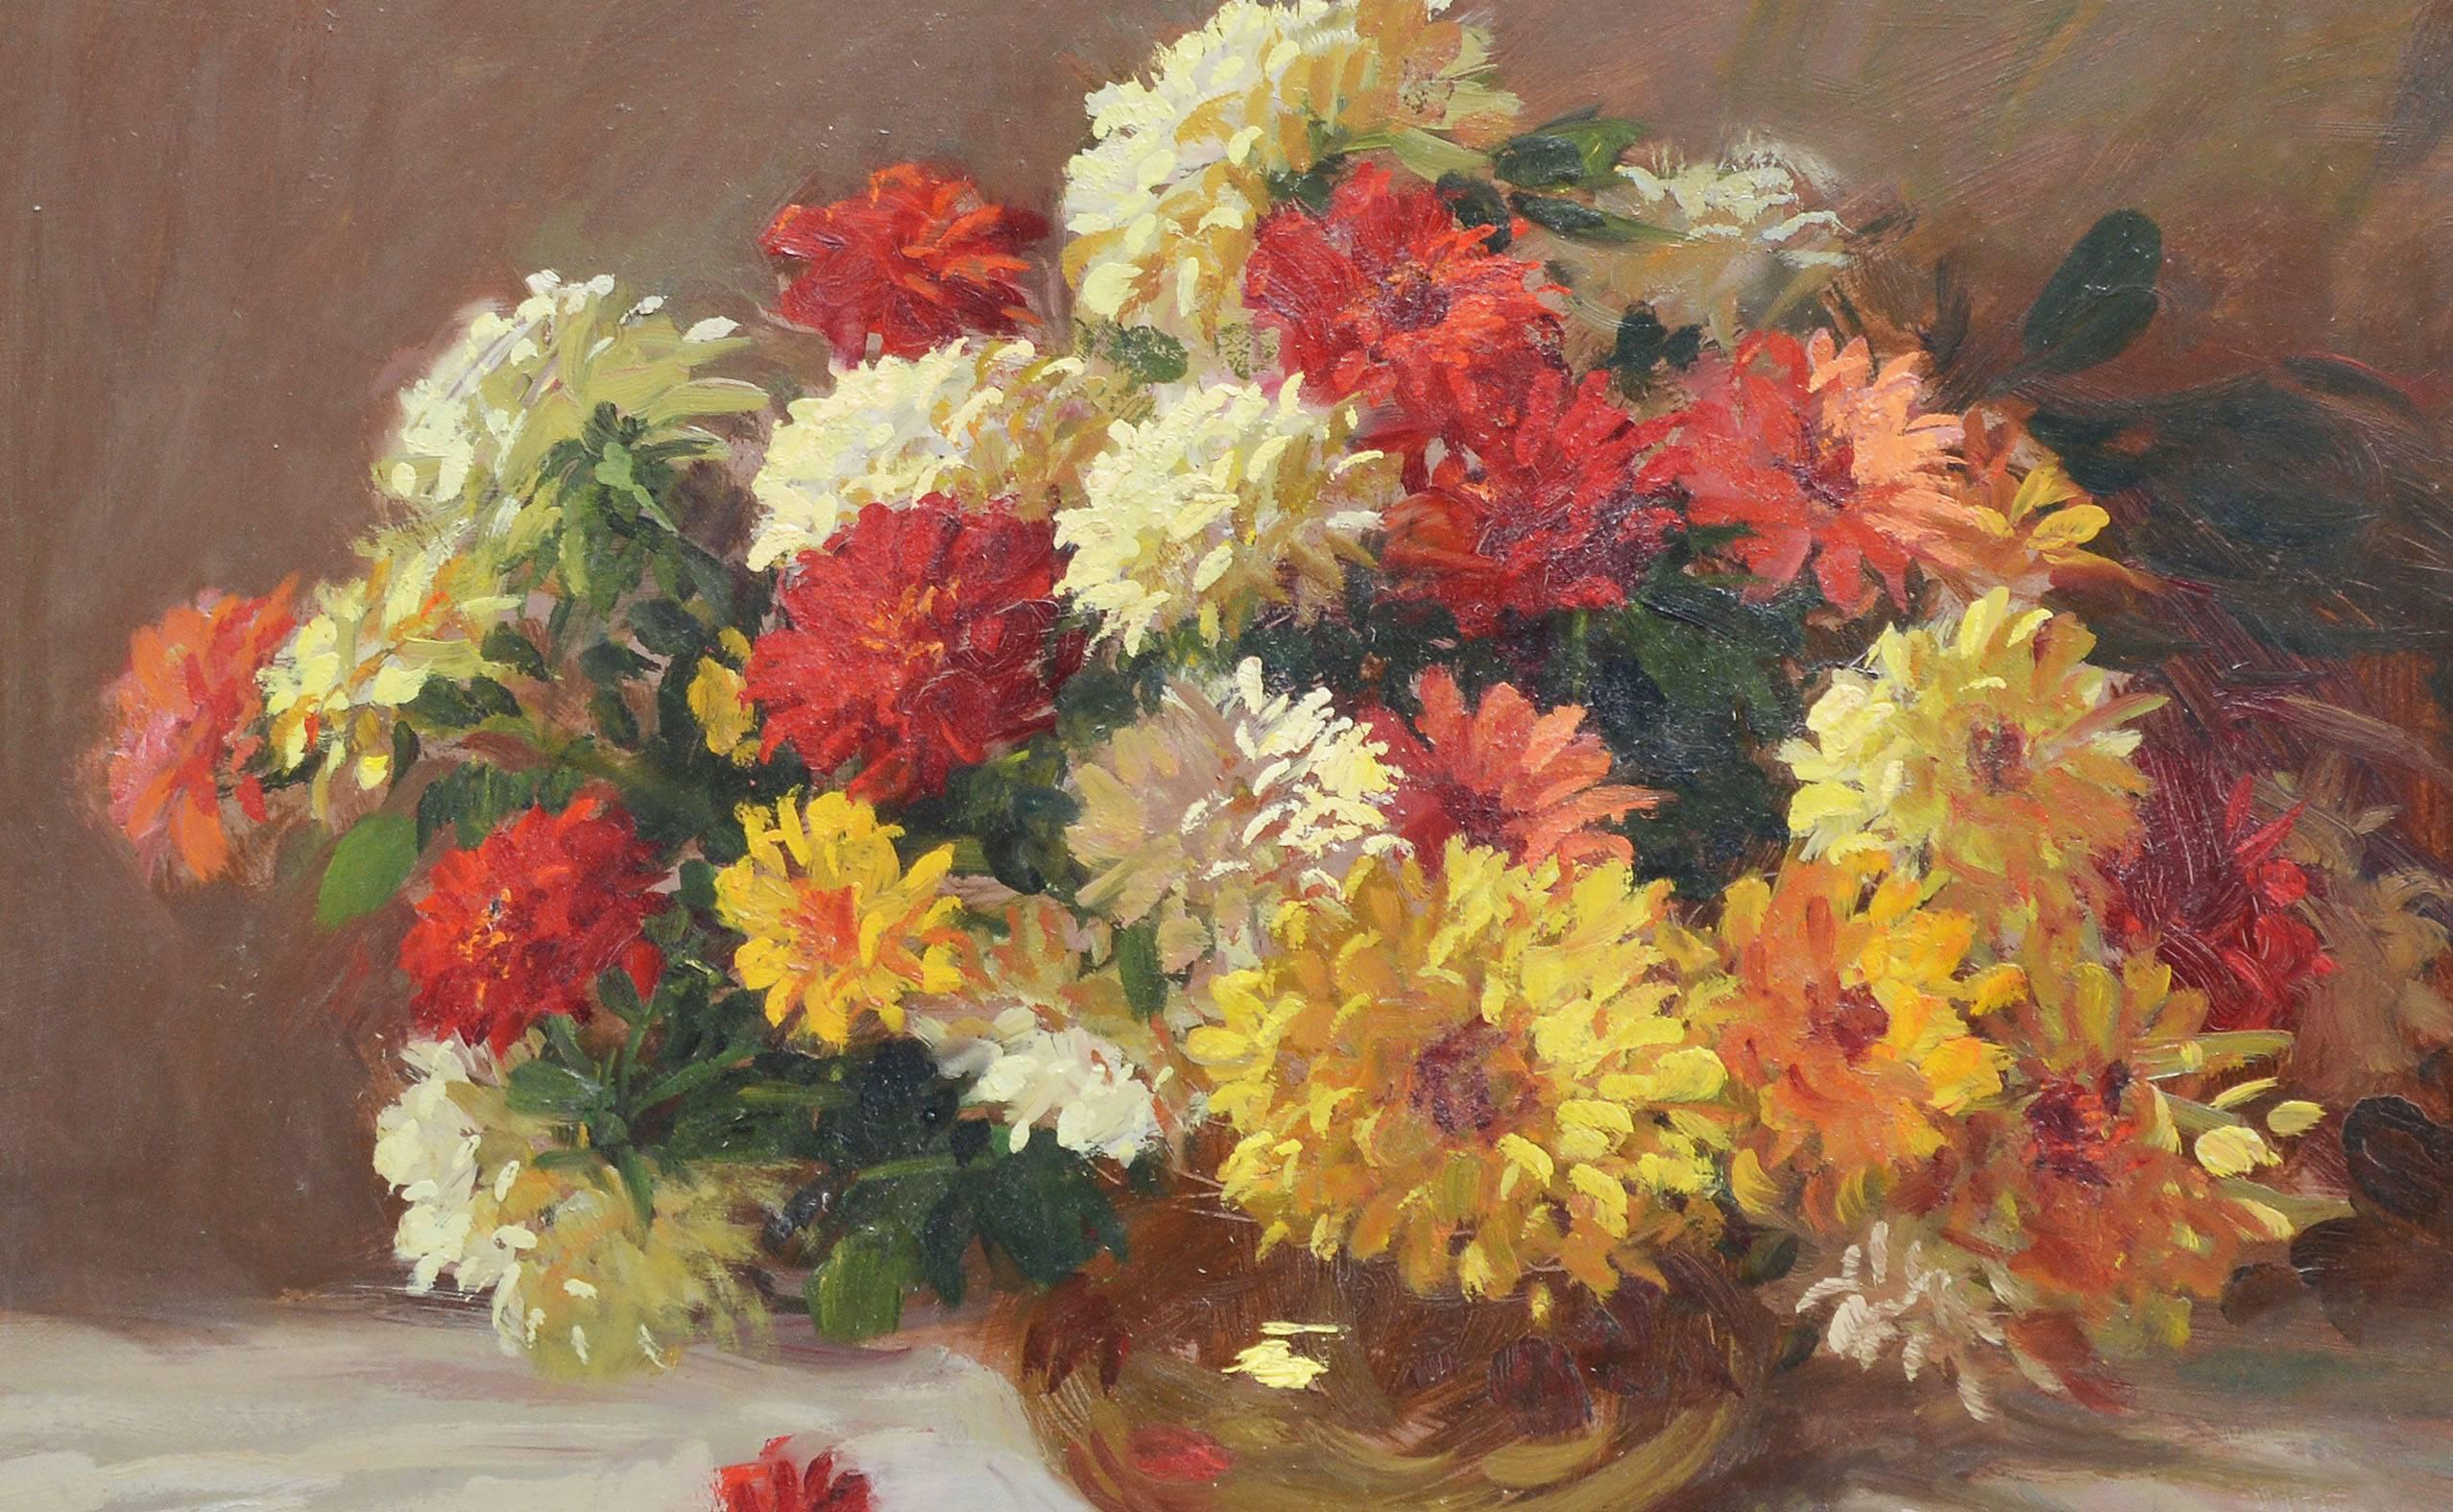 Impressionist flower still life by Rudolph Colao (1927-2014).  Oil on board, circa 1960.  Signed lower left, "R. Colao".  Displayed in a period impressionist frame.  Image size, 16"L x 12"H, overall 24"L x 20"H.